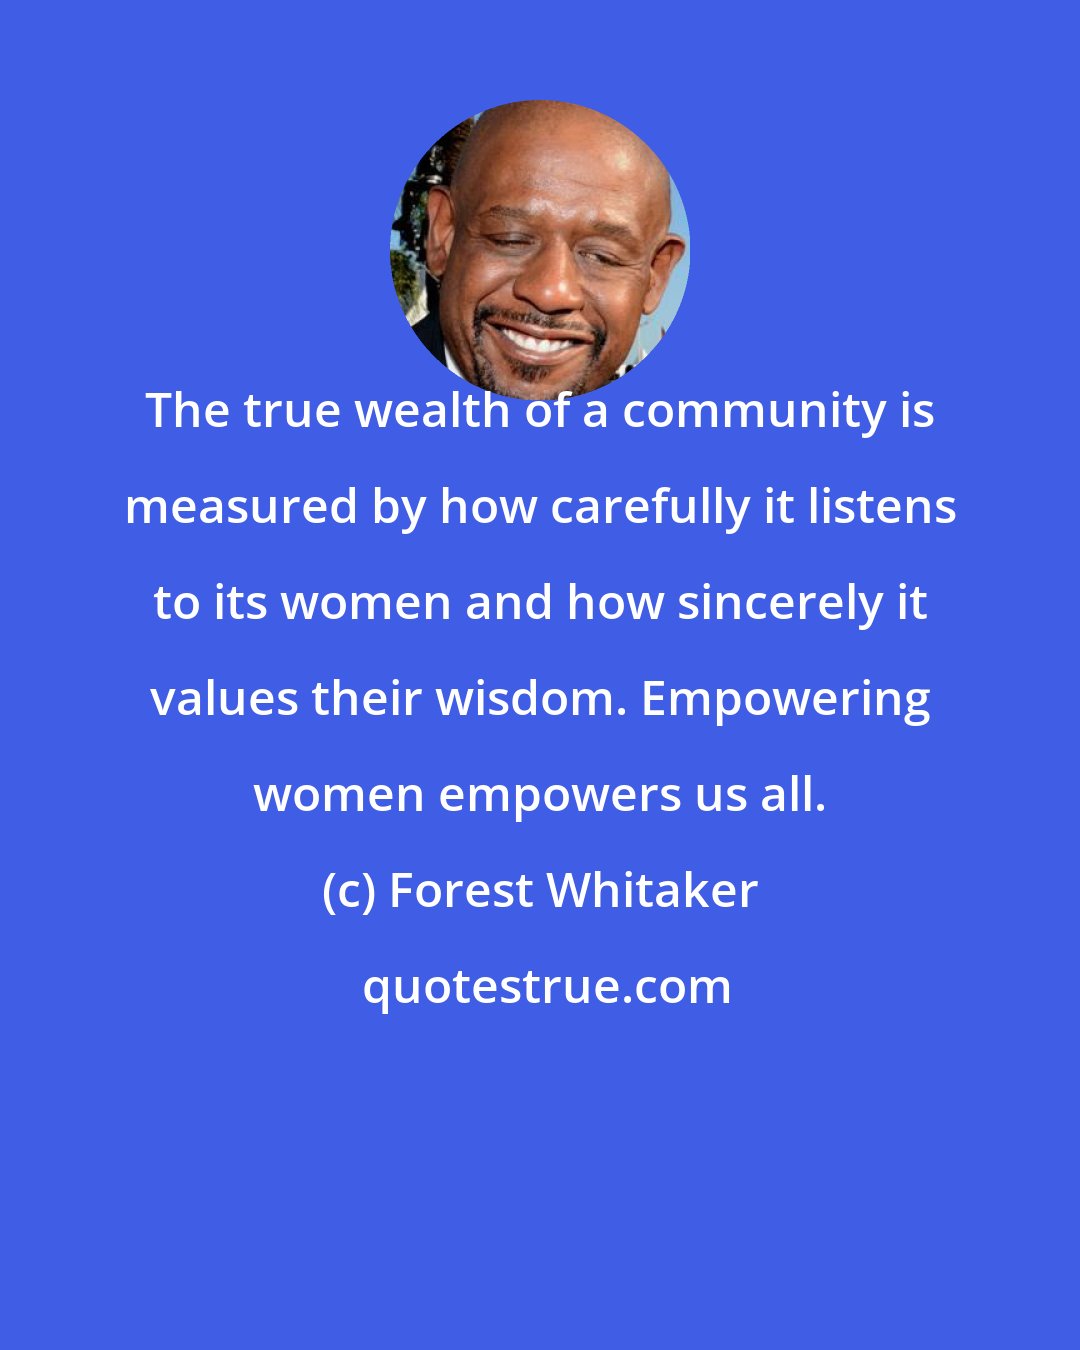 Forest Whitaker: The true wealth of a community is measured by how carefully it listens to its women and how sincerely it values their wisdom. Empowering women empowers us all.